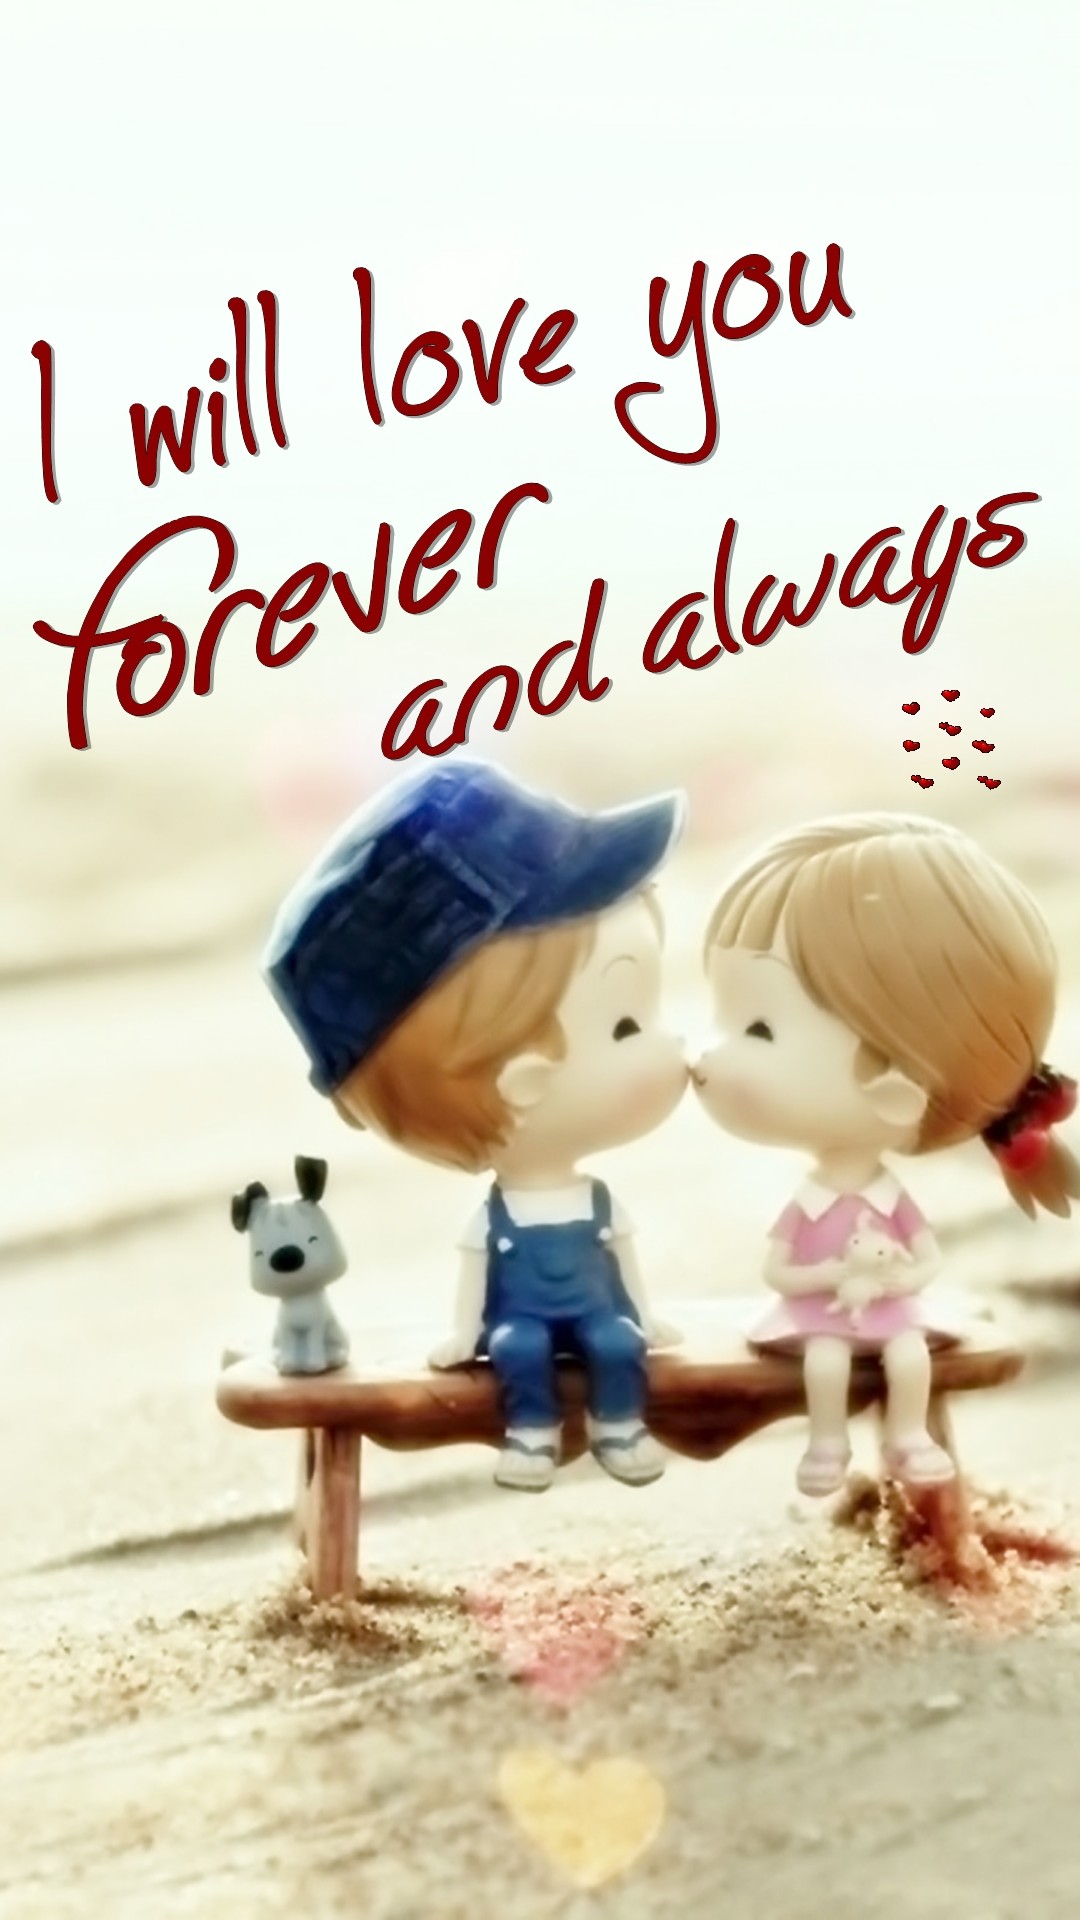 Tap Image For More Love Wallpapers Love You Forever Mobile9 Iphone 6 1080x1920